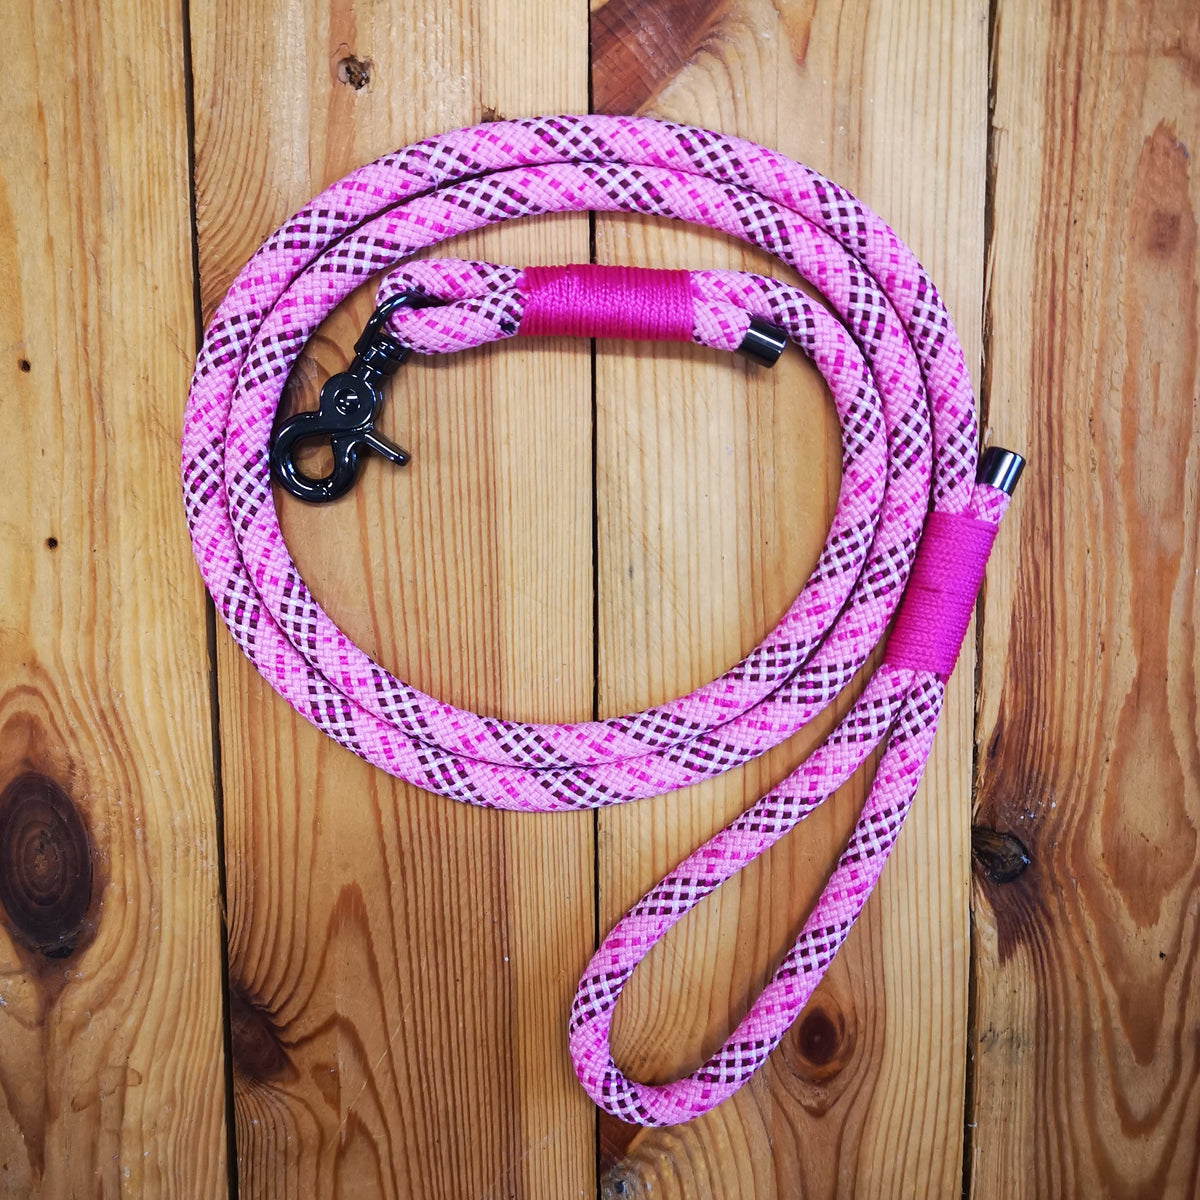 Bright Pink and Hot Magenta Rope Dog Lead - The Mewstone Candle Co